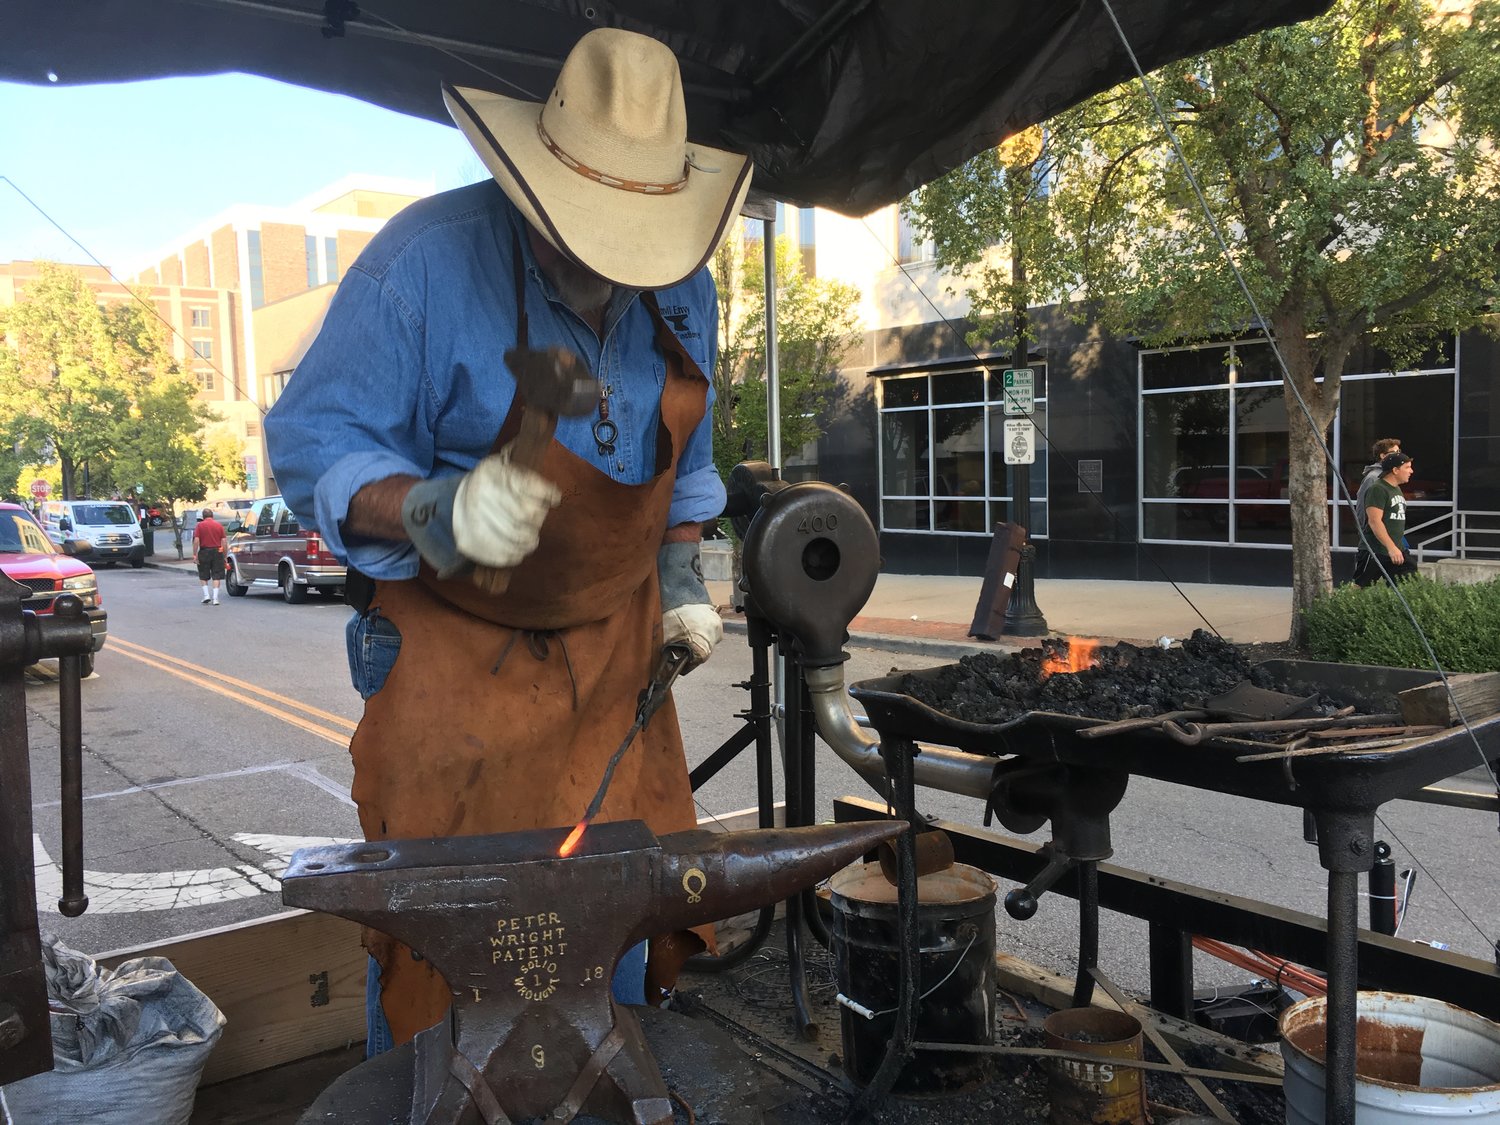 Blacksmith wearing a cowboy hat with hammer in hand working at a mobile forge giving a blacksmithing demonstration.